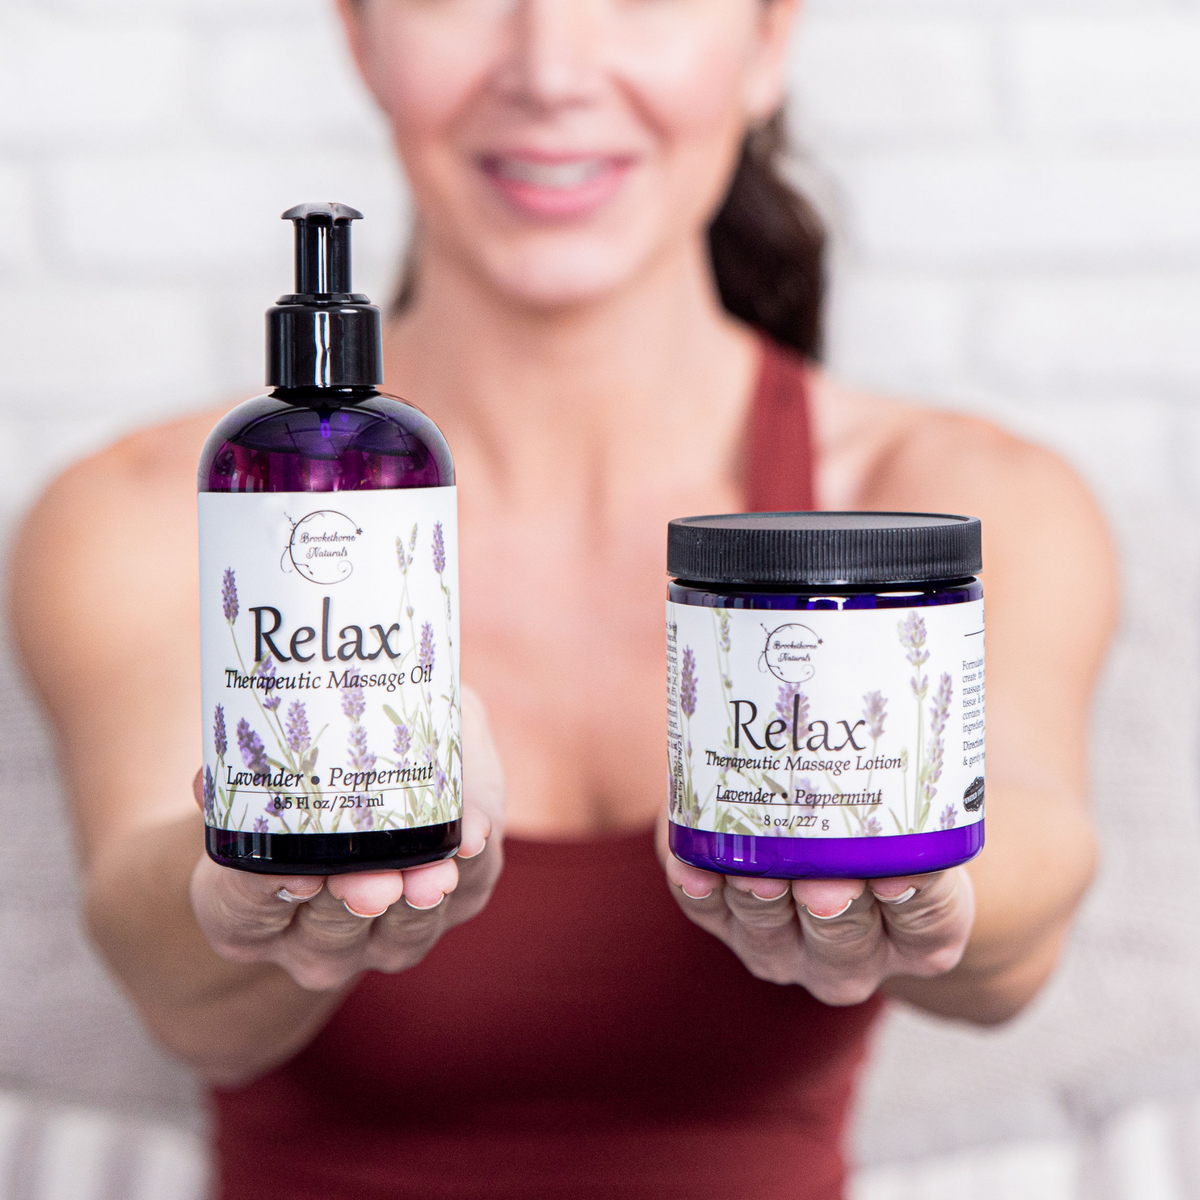 Just Relax Bundle, Relax Therapeutic Massage Oil and Relax Therapeutic Massage Lotion being held by woman.